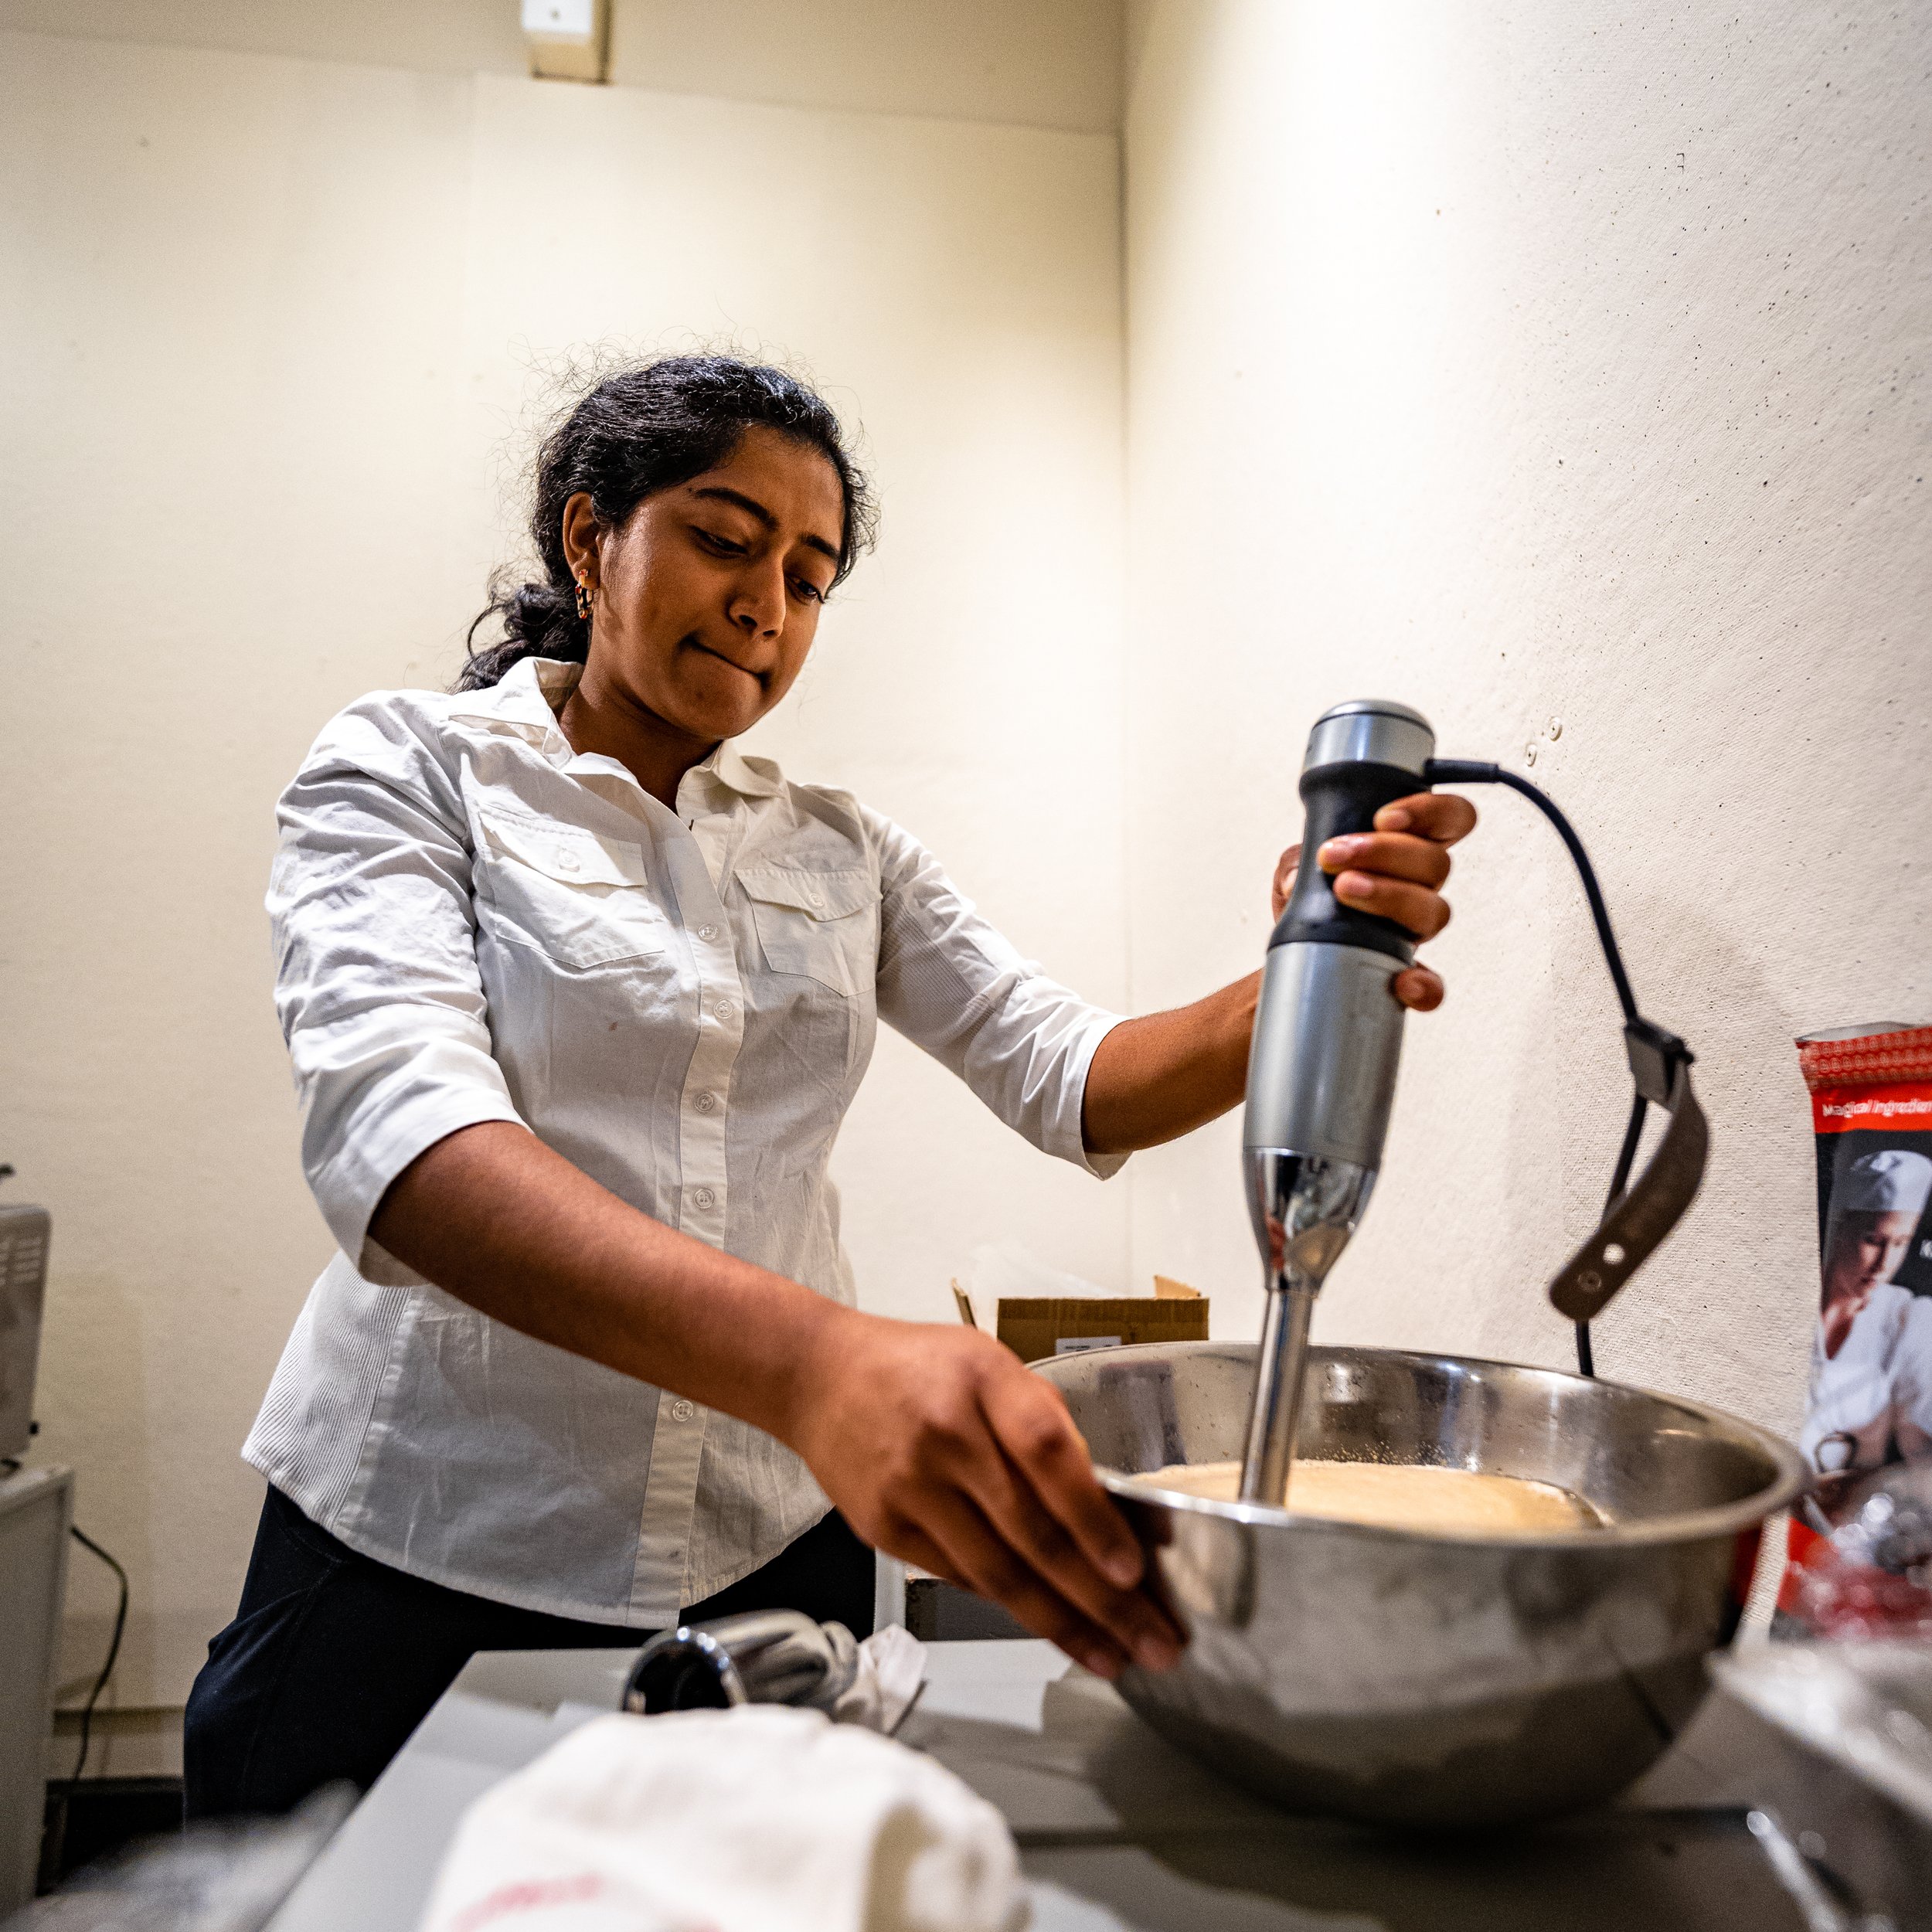 Sangita whipping up culinary foam in the MINCE portable kitchen before serving.